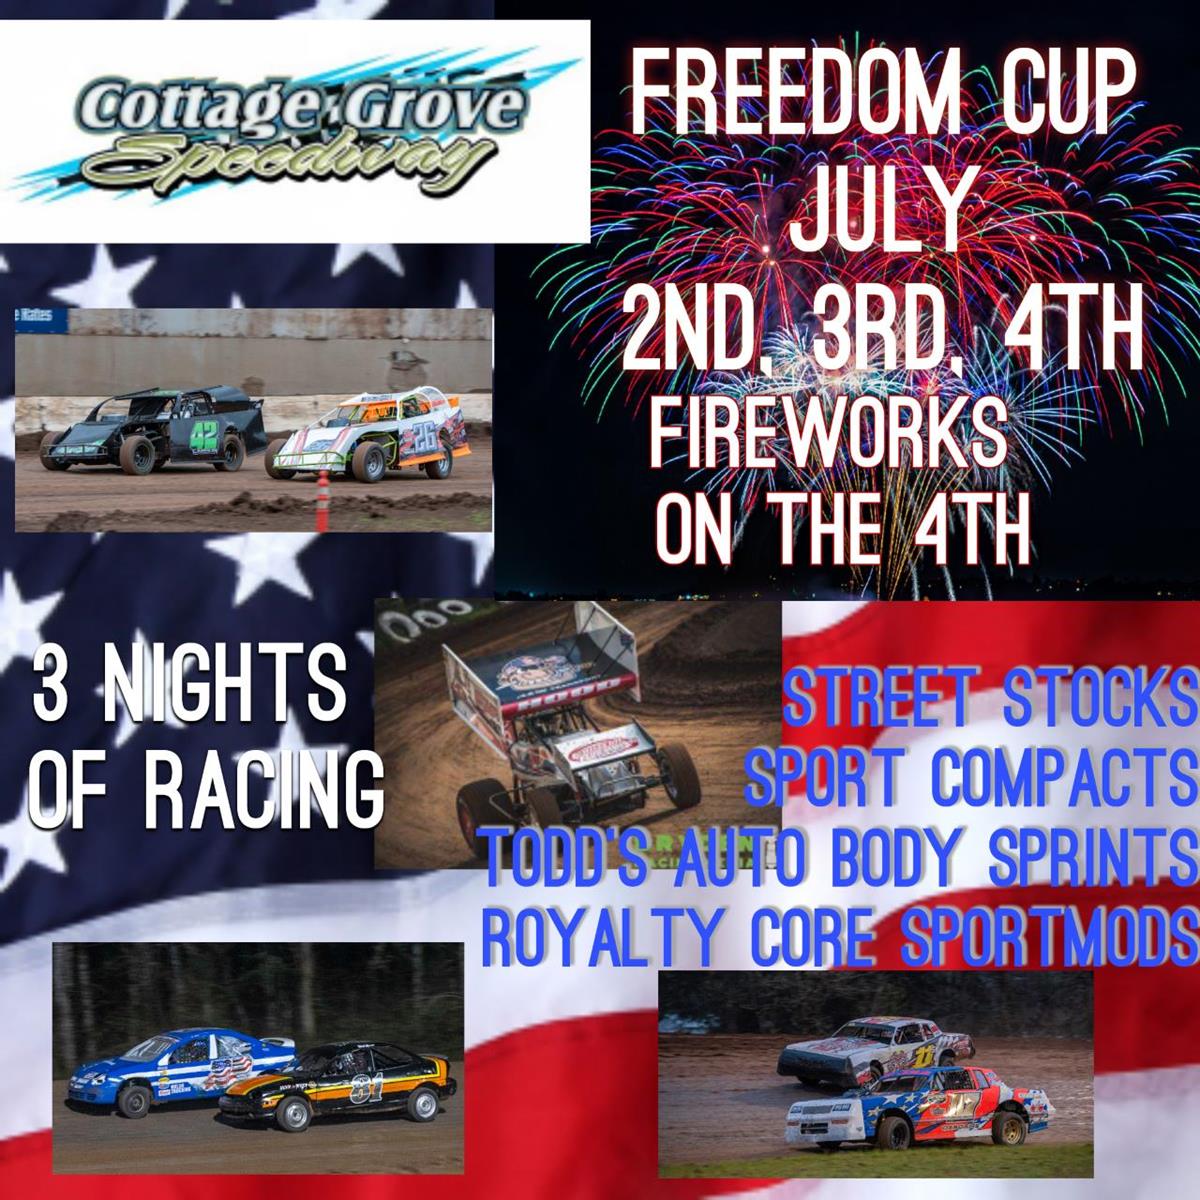 STREET STOCKS ADDED TO 3 NIGHTS OF FREEDOM CUP AT COTTAGE GROVE SPEEDWAY!!